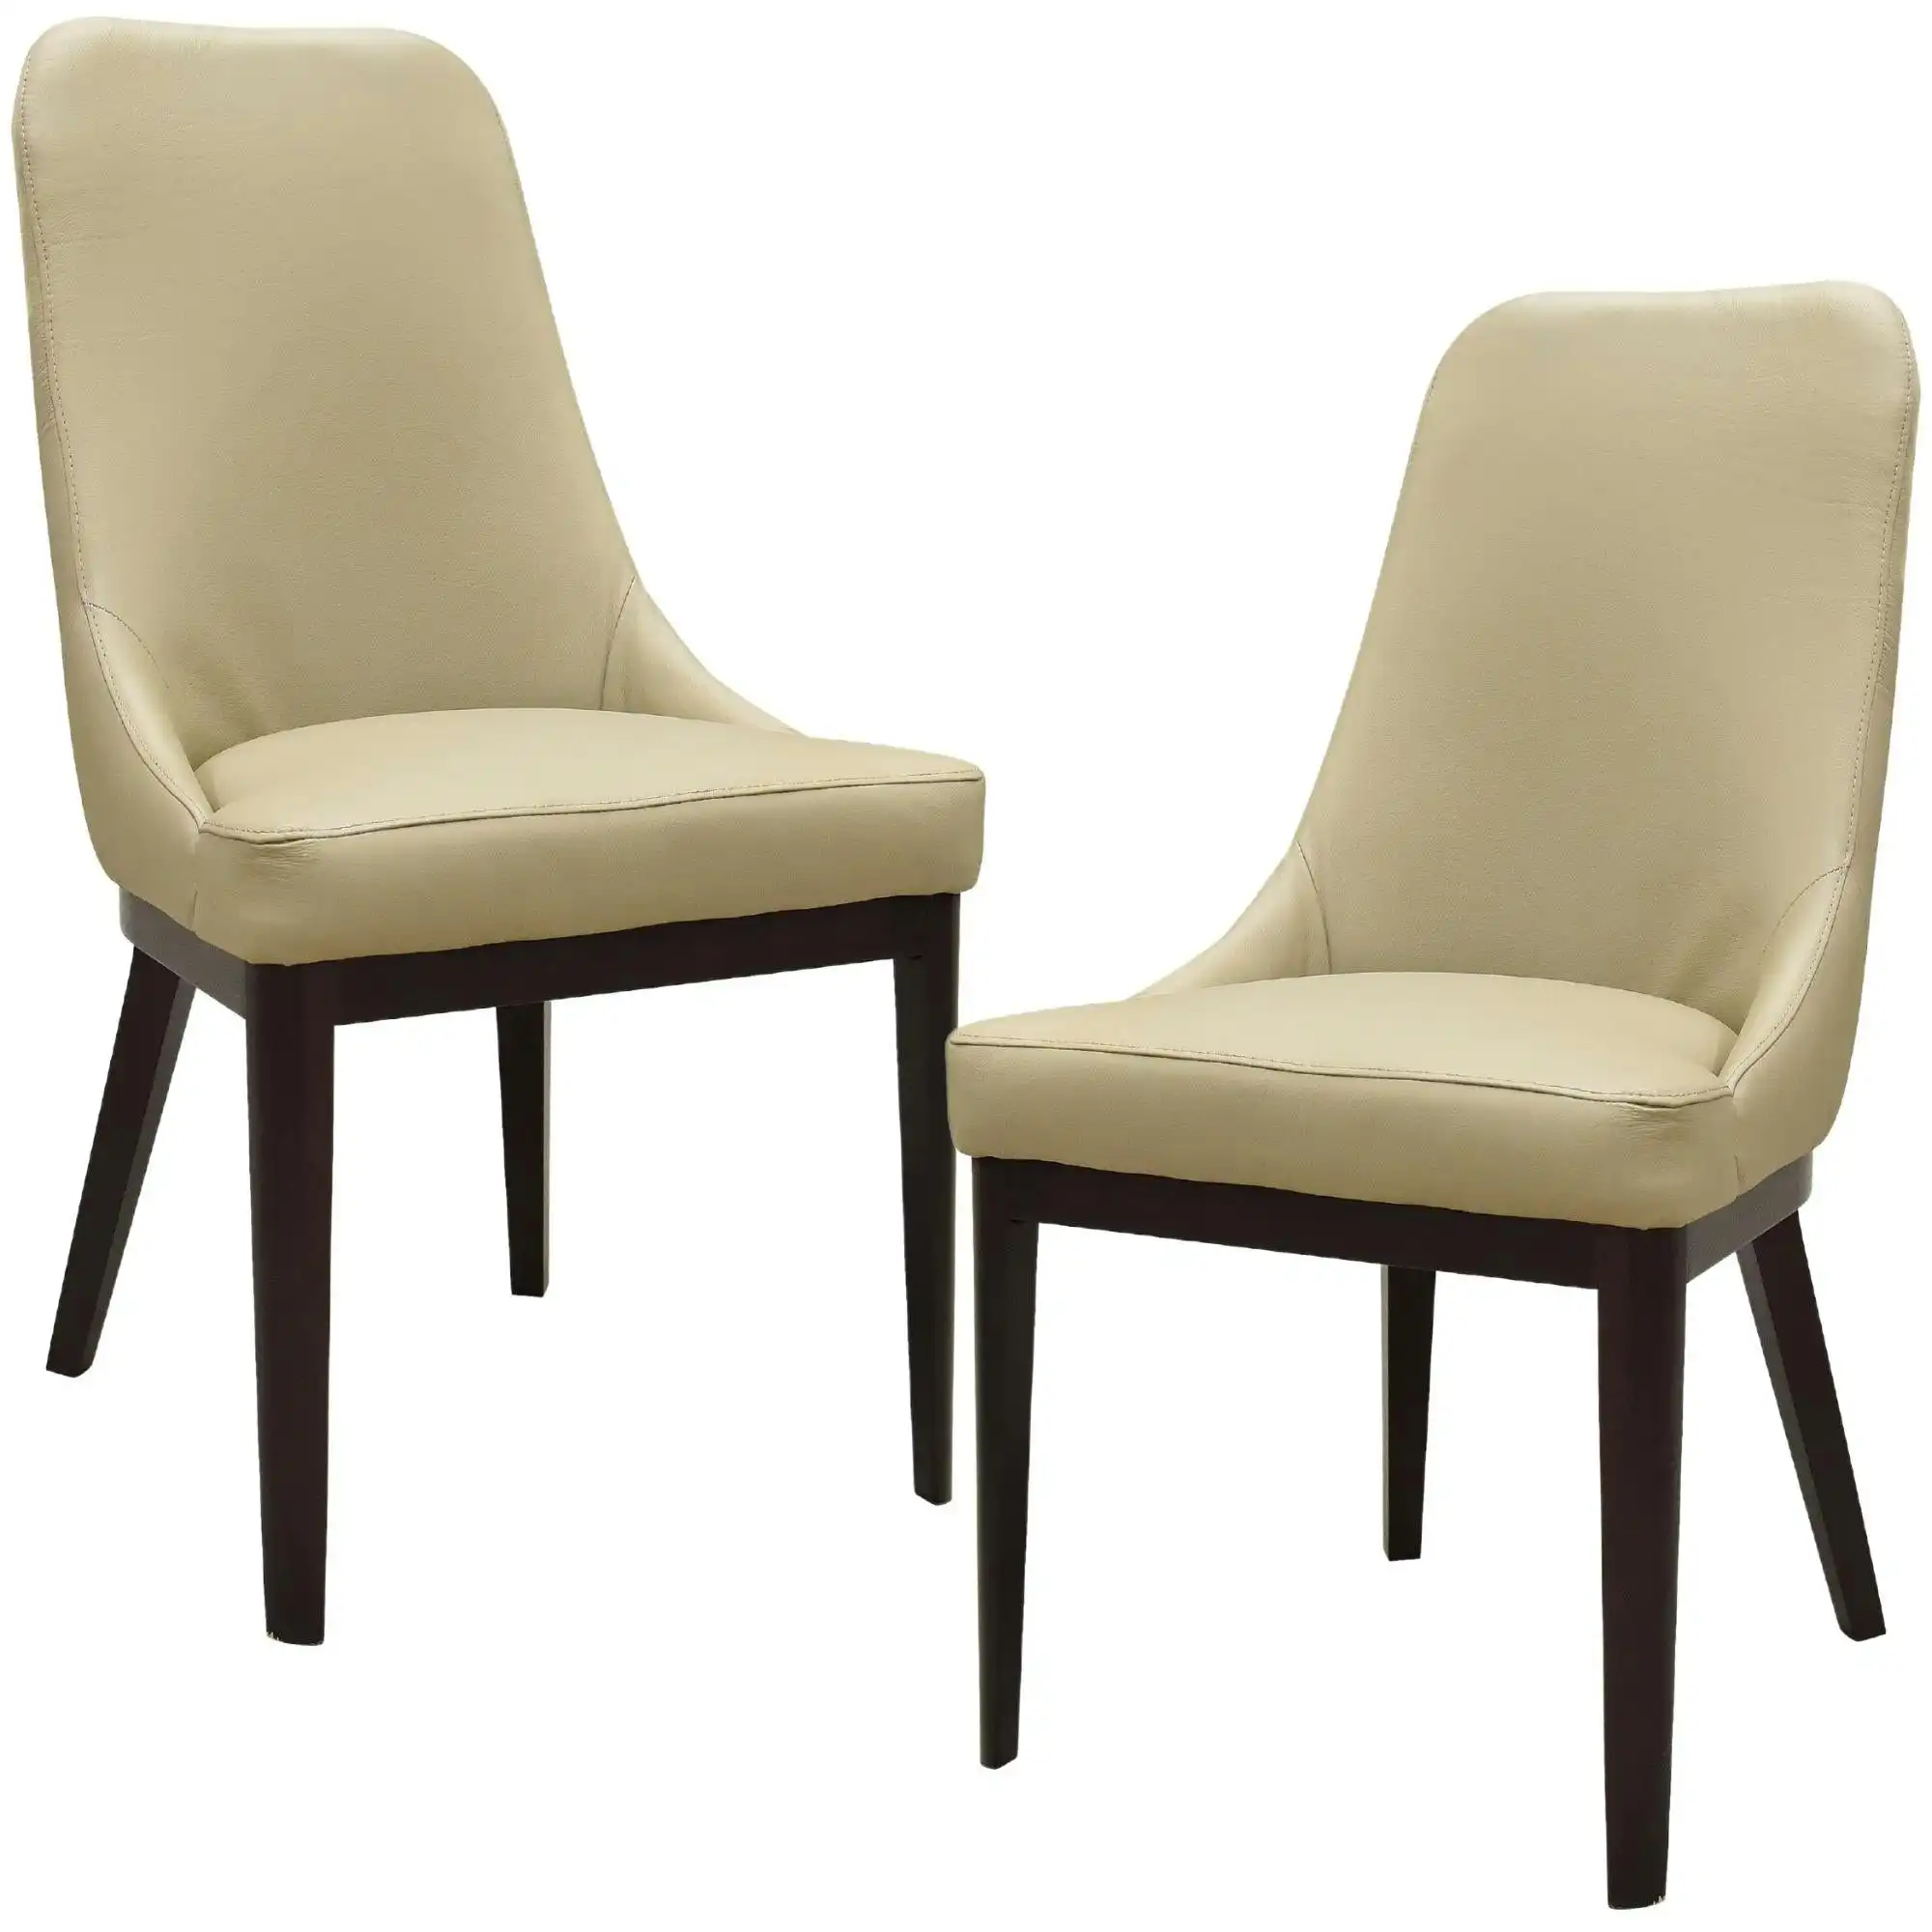 Claire Set of 2 Leather Dining Chair Taupe